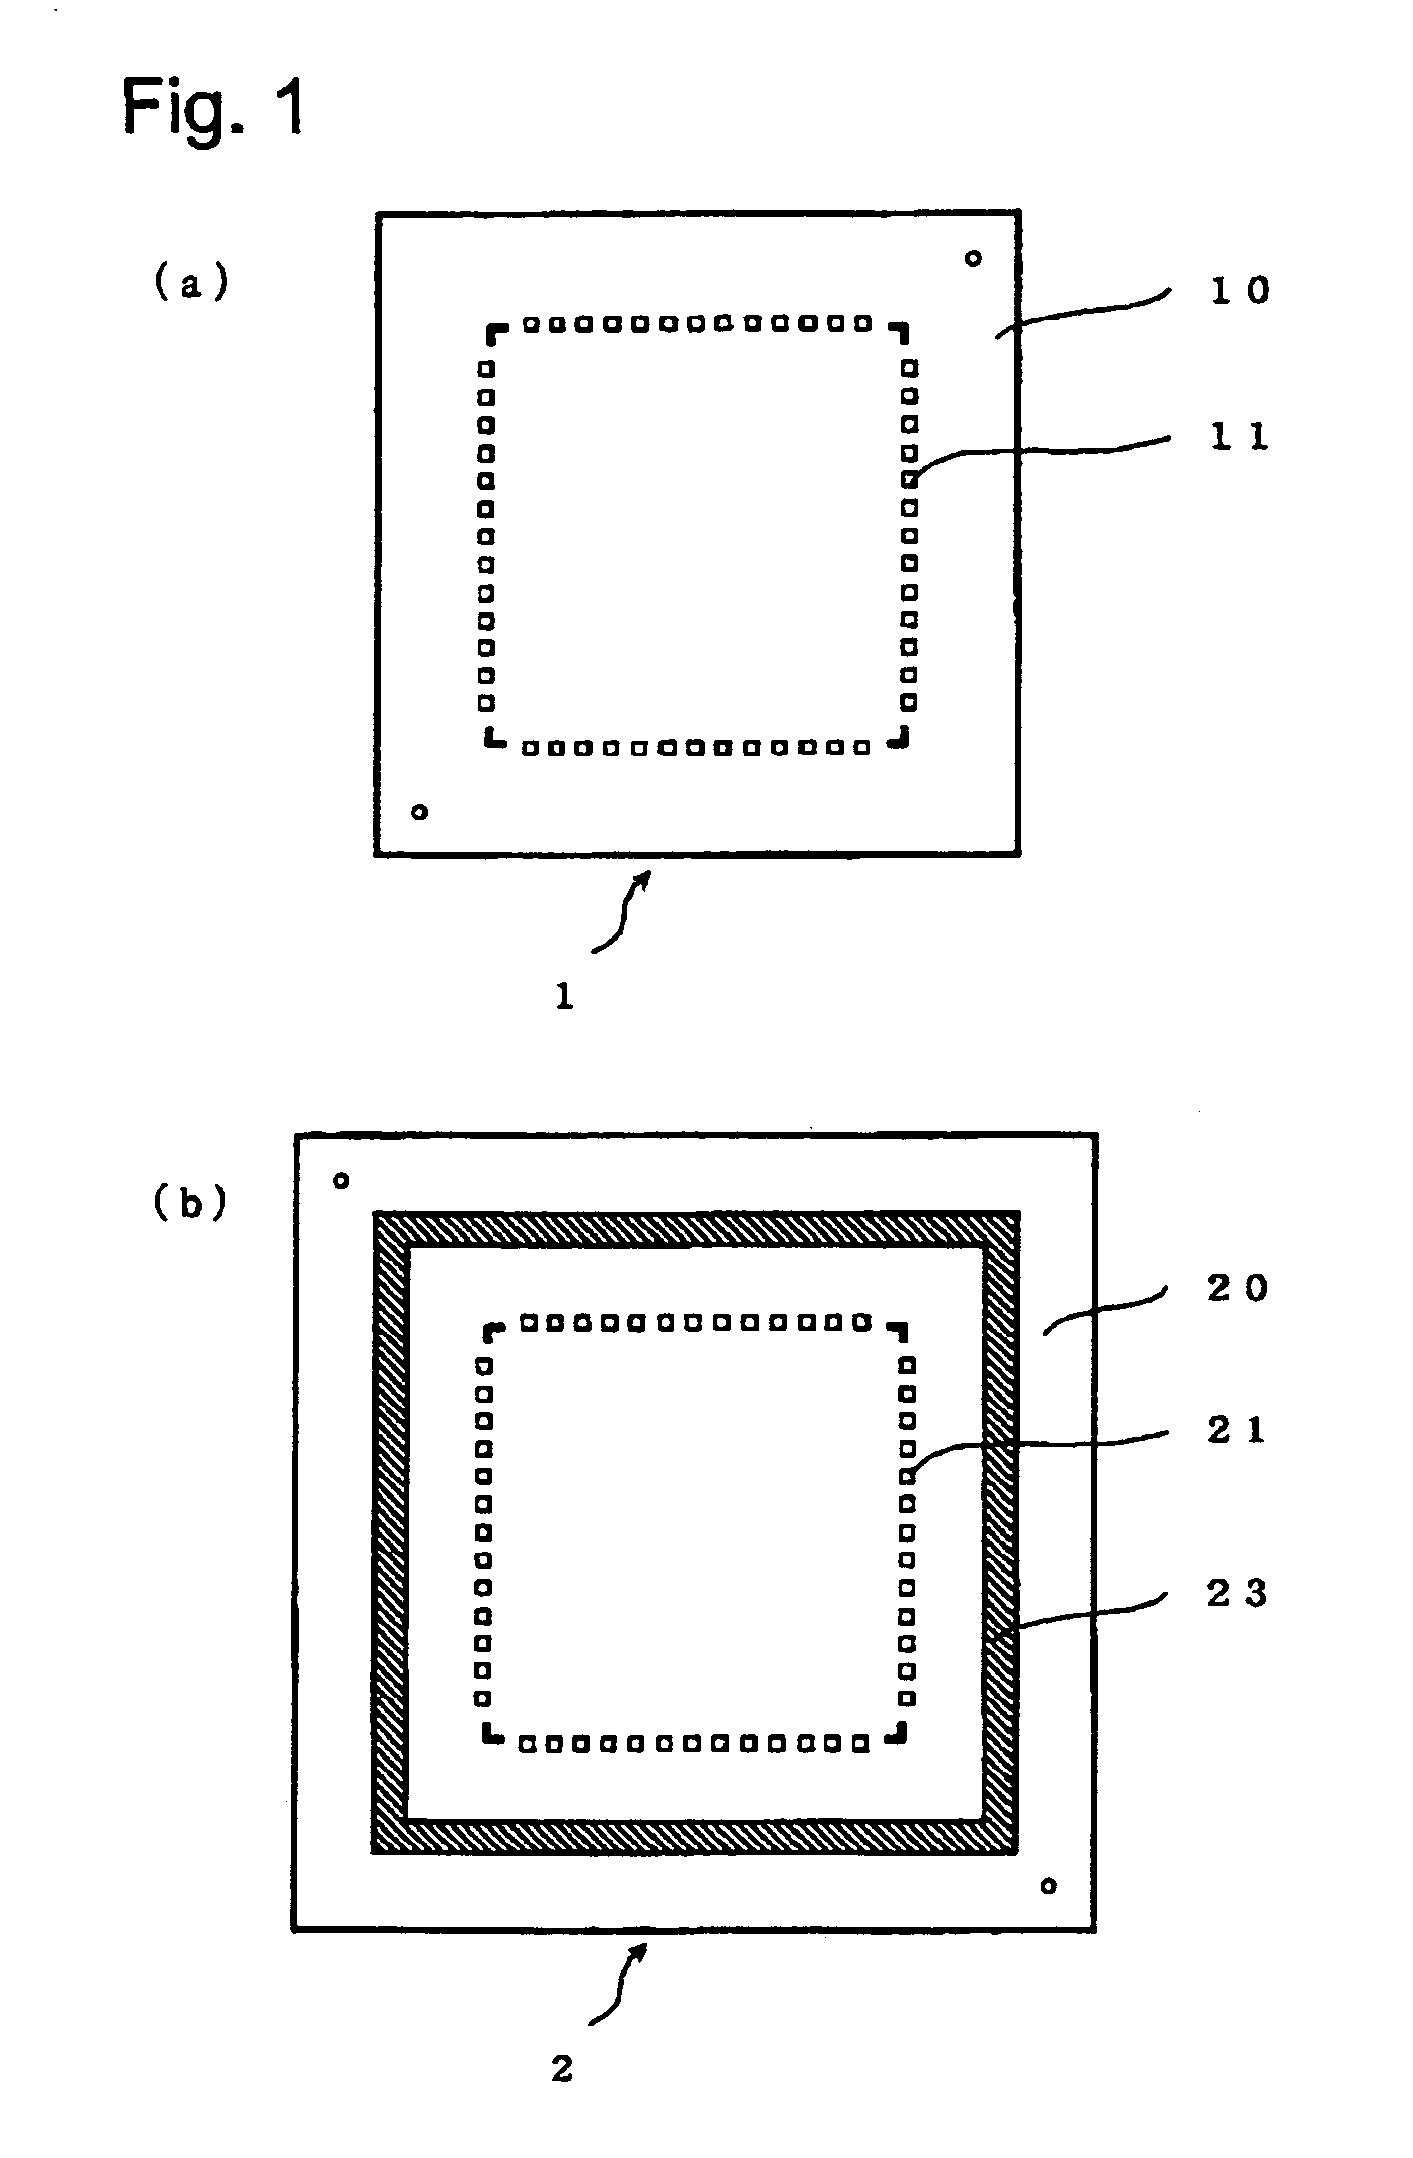 High-reliable semiconductor device using hermetic sealing of electrodes